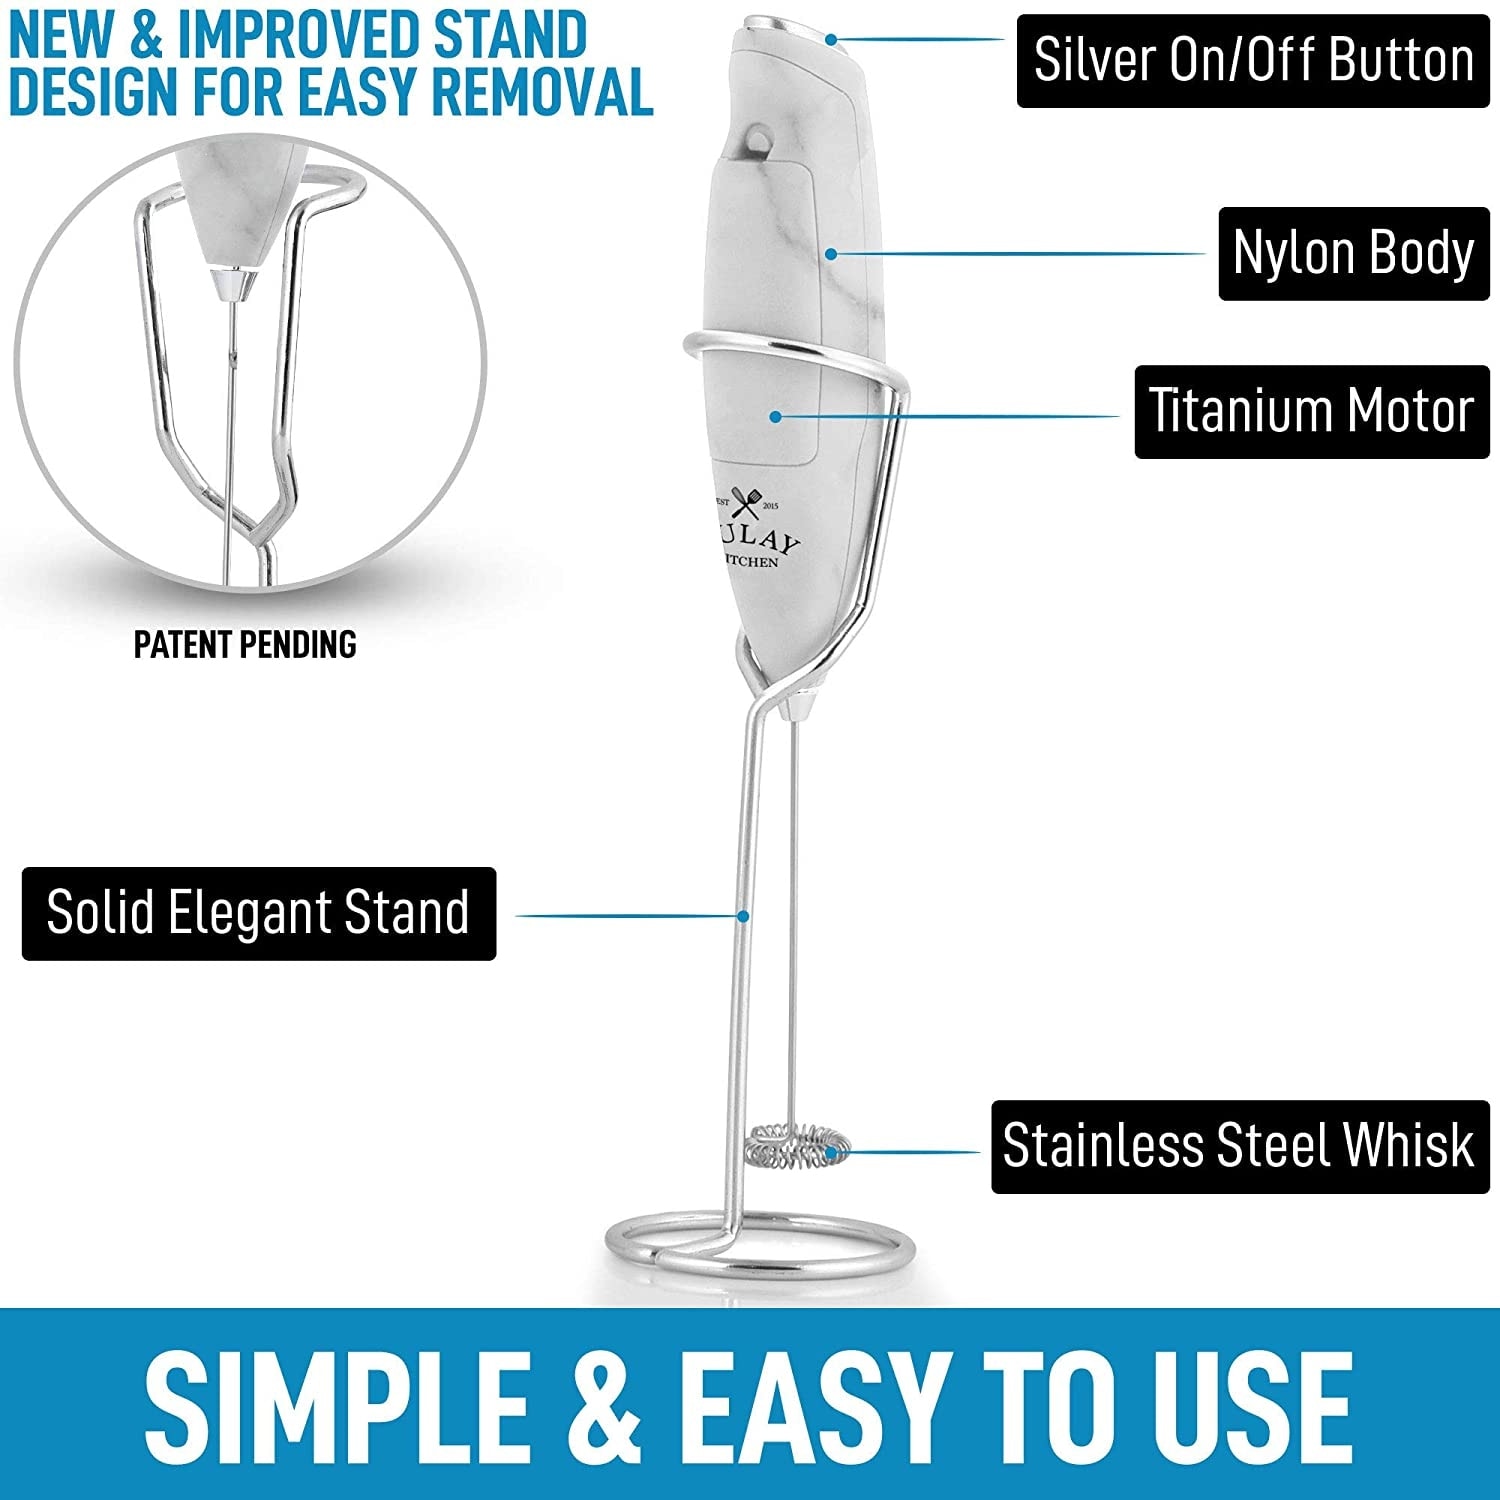 Zulay Milk Frother OG - Holster Stand - Marble - Bed Bath & Beyond